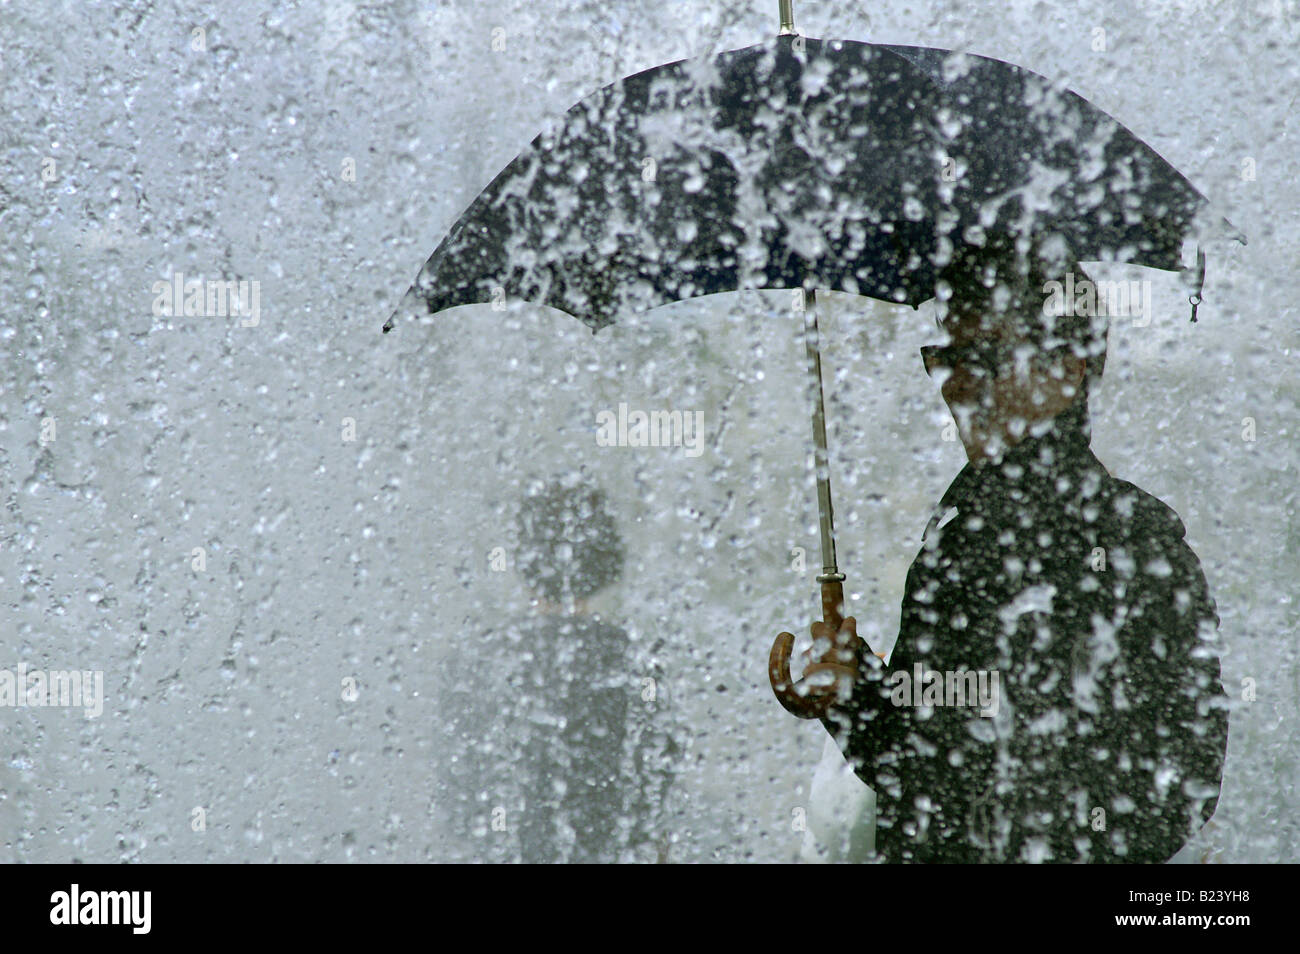 man with umbrella during very heavy downpour, rainstorm in London Stock Photo